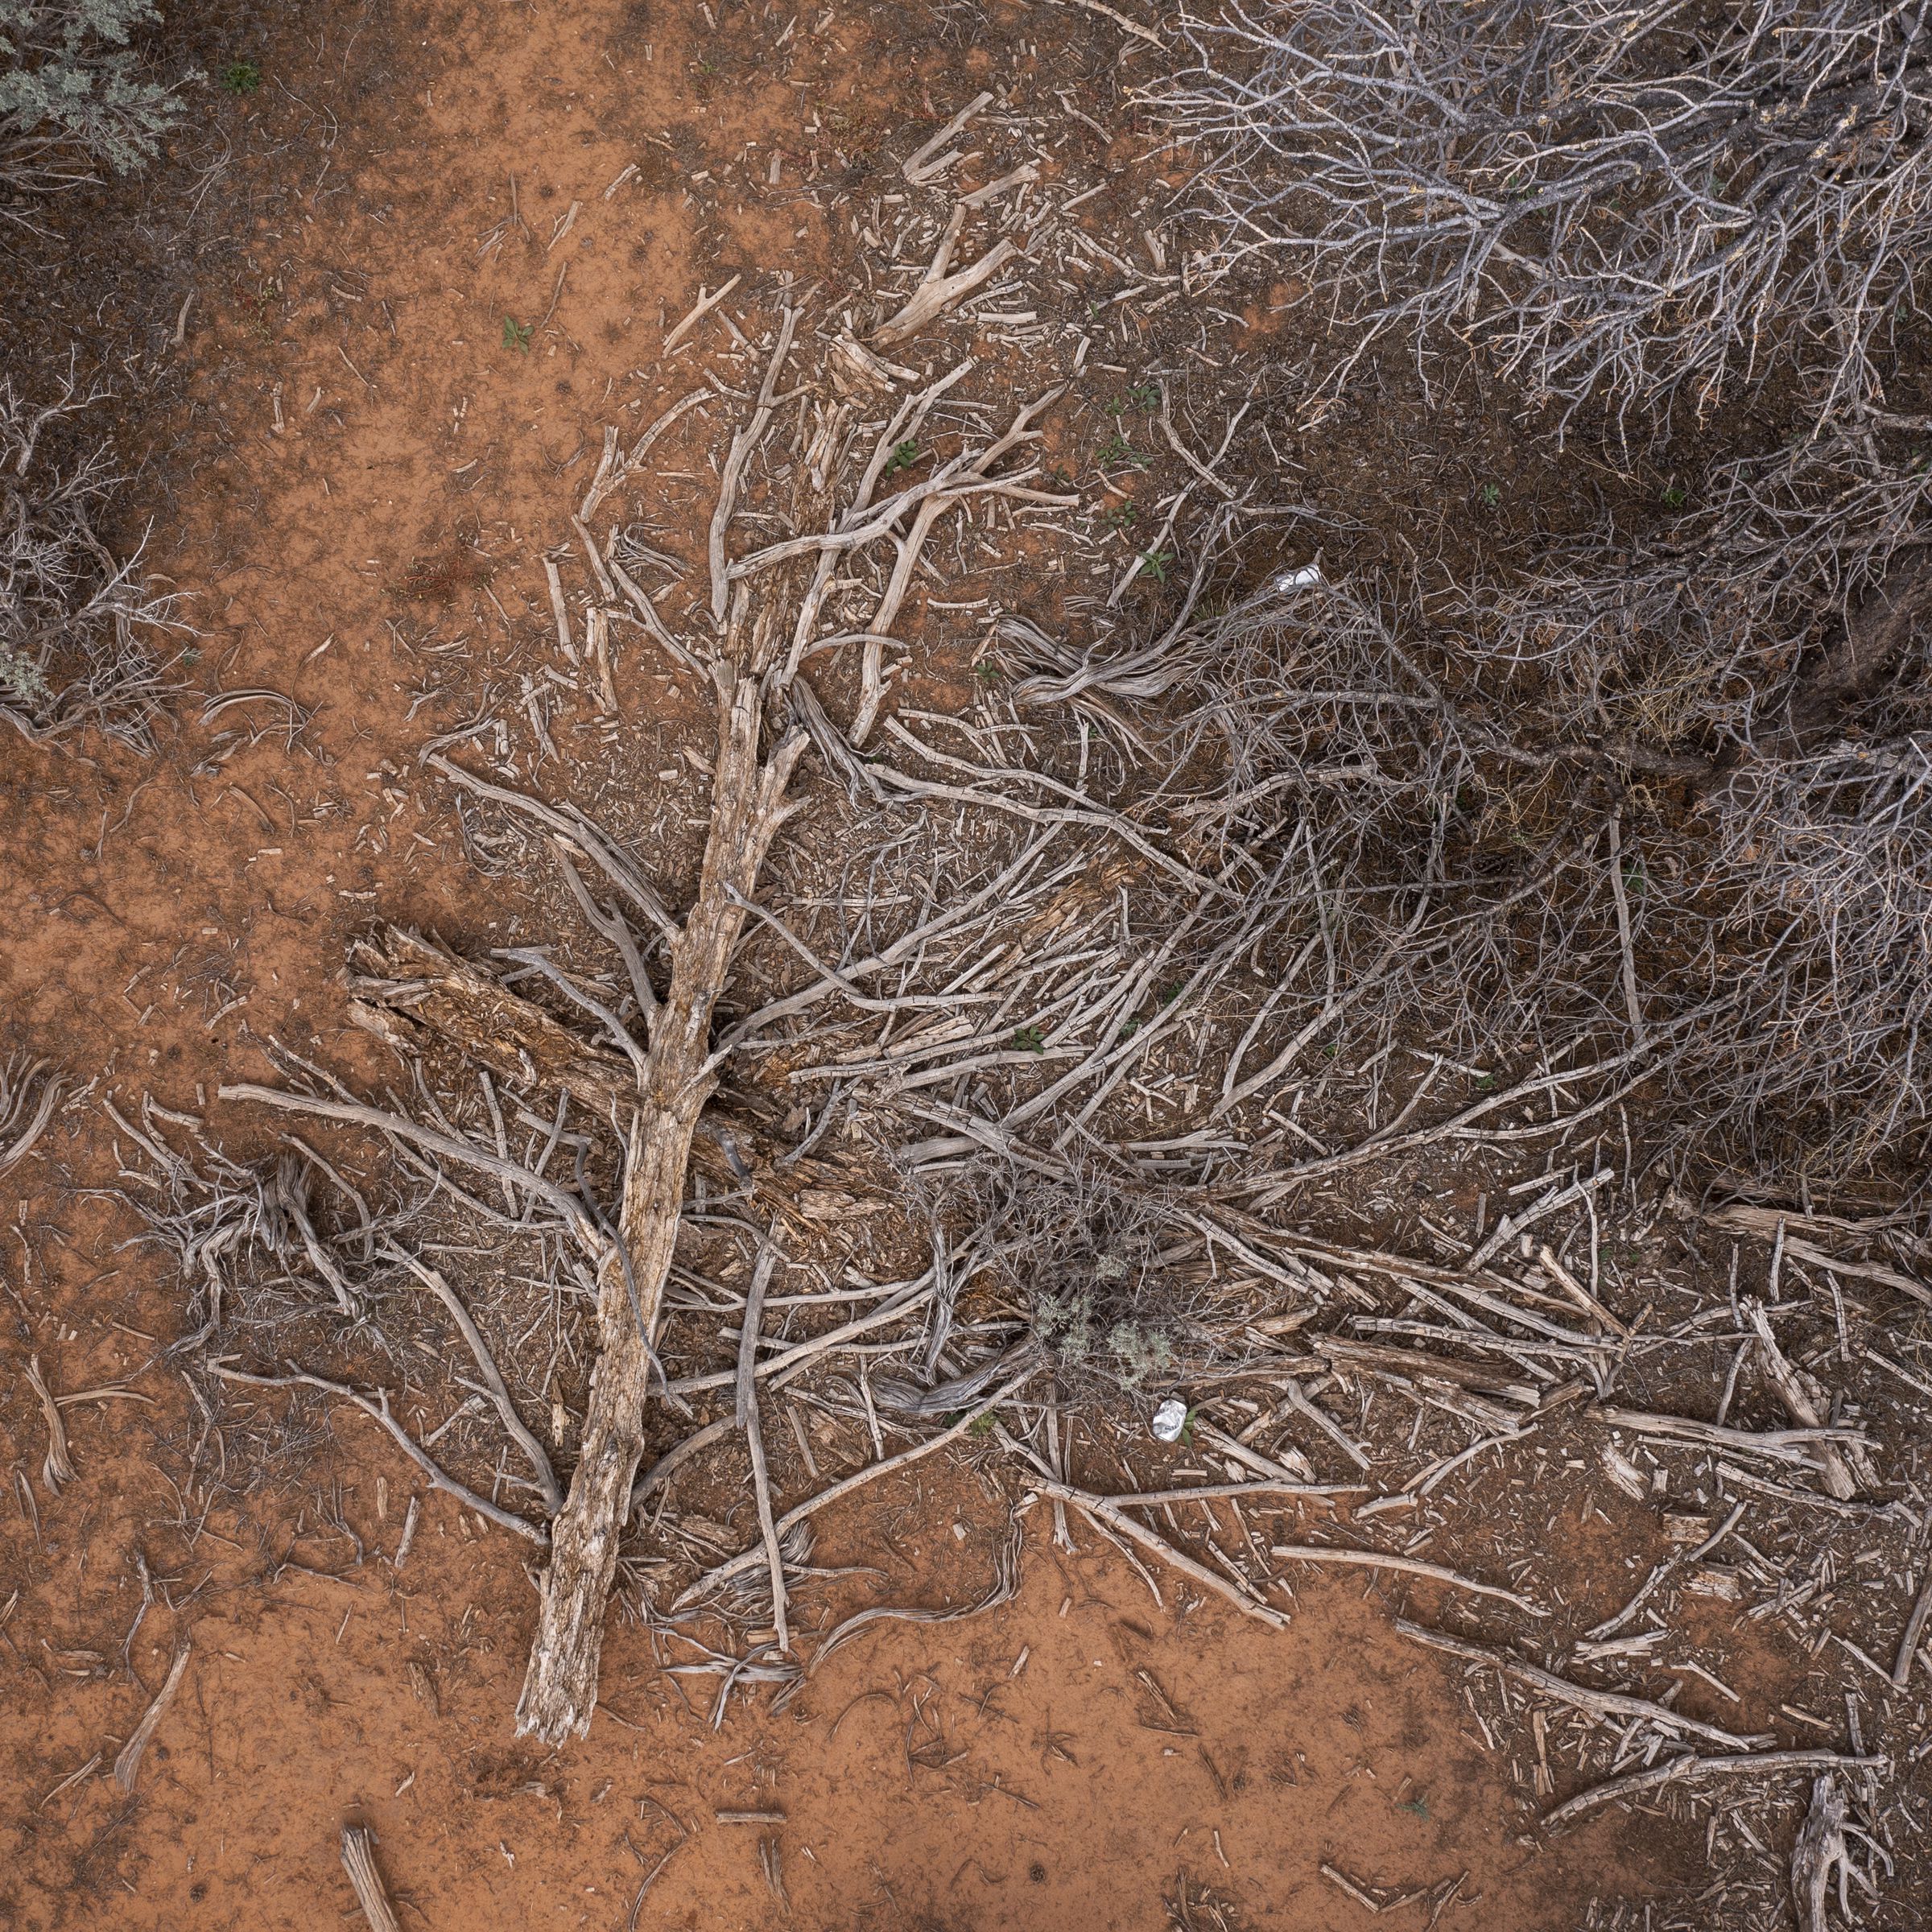 A dead tree lays in pieces on parched, brown ground.